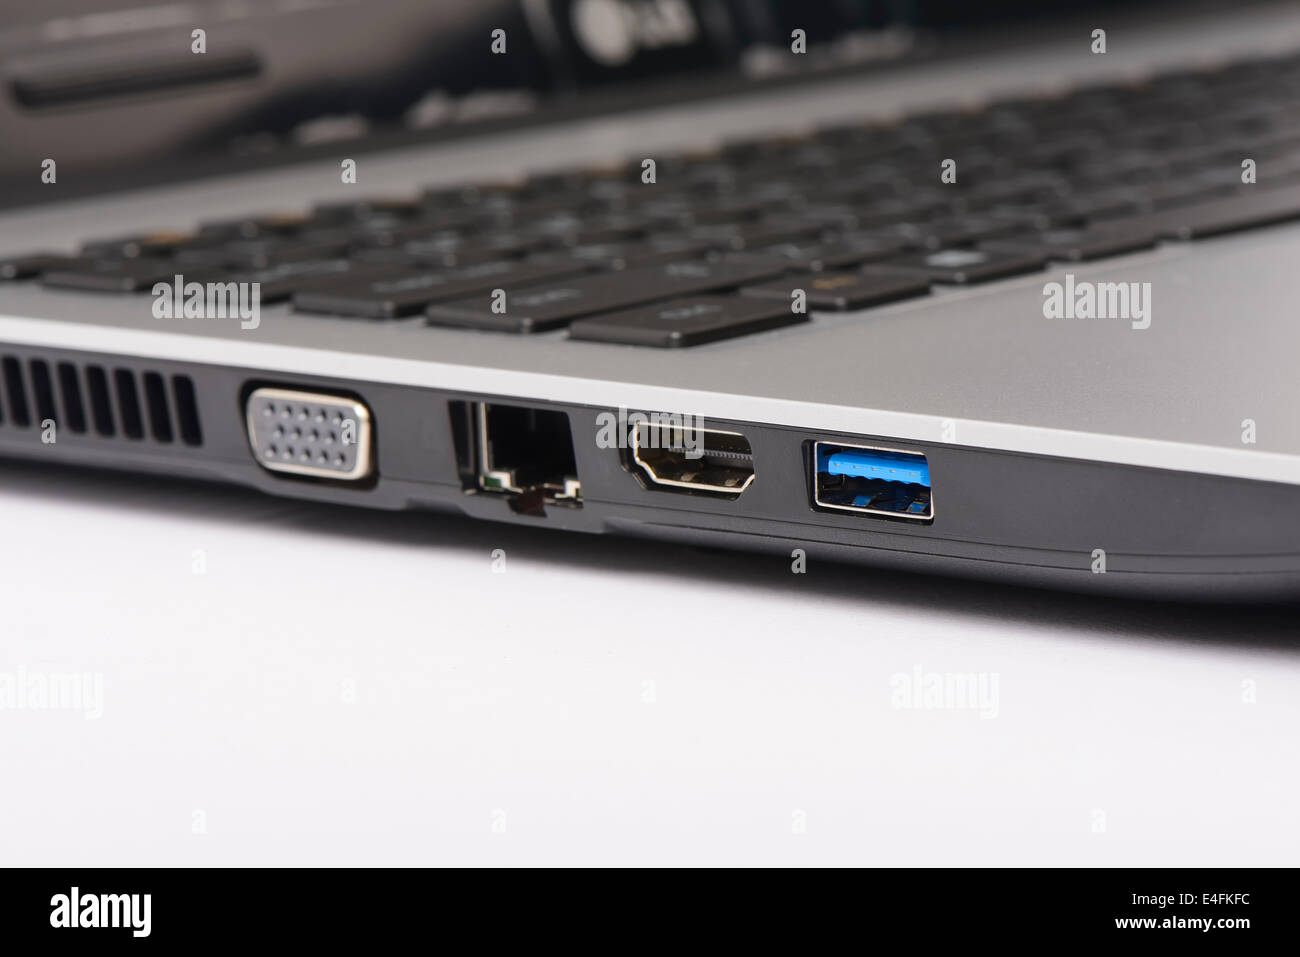 USB 3.0, LAN and graphic ports of laptop computer Stock Photo